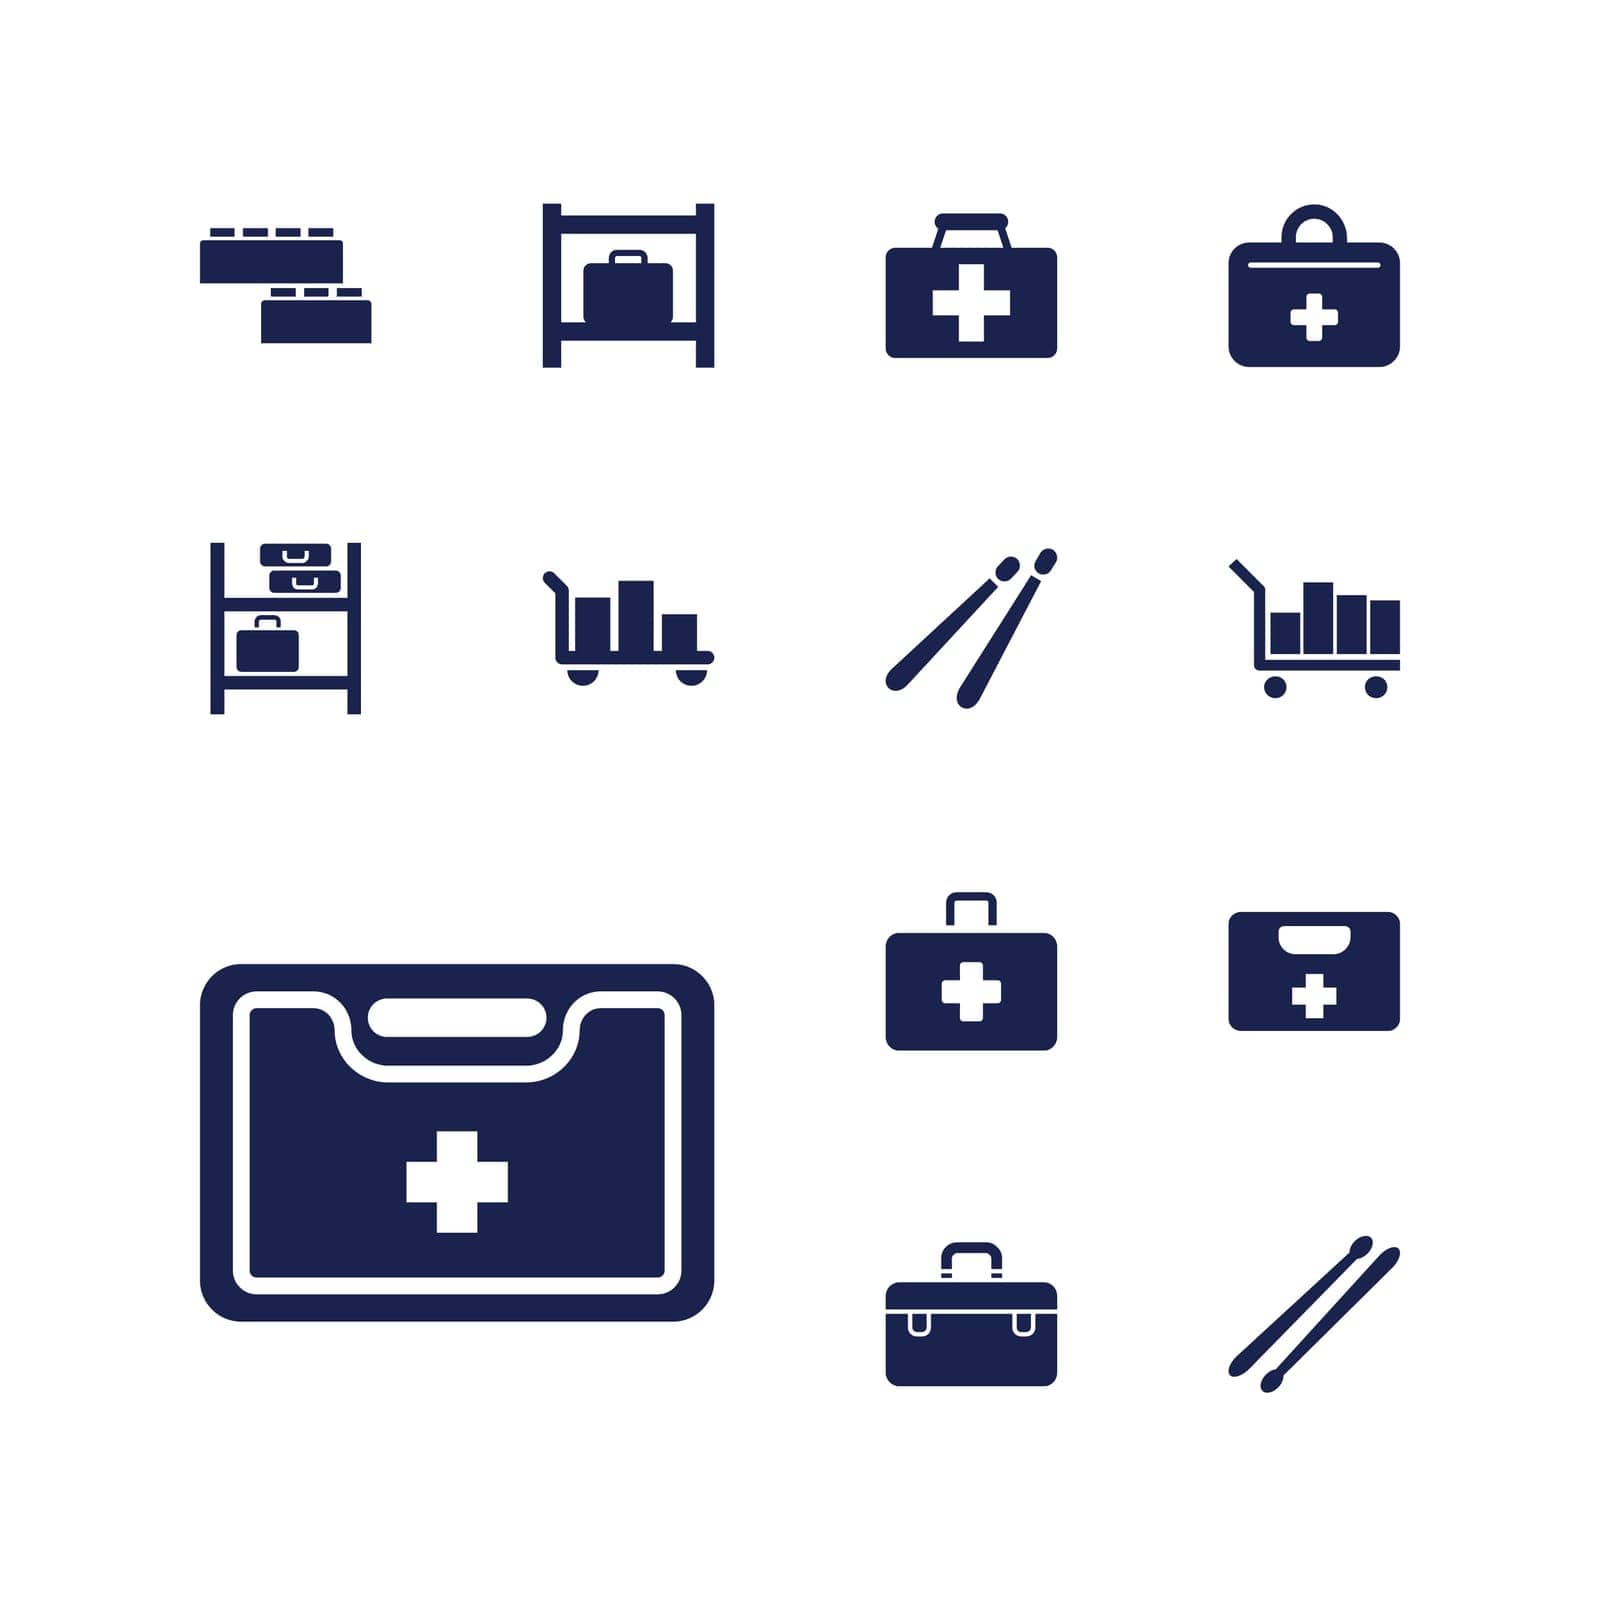 container,symbol,medical,icon,sign,isolated,bag,drum,emergency,box,storage,building,luggage,flat,patient,design,kit,stick,vector,hospital,graphic,case,set,suitcase,cross,medicine,tool,doctor,help,background,silhouette,toolbox,illustration,aid,first,child,care by ogqcorp